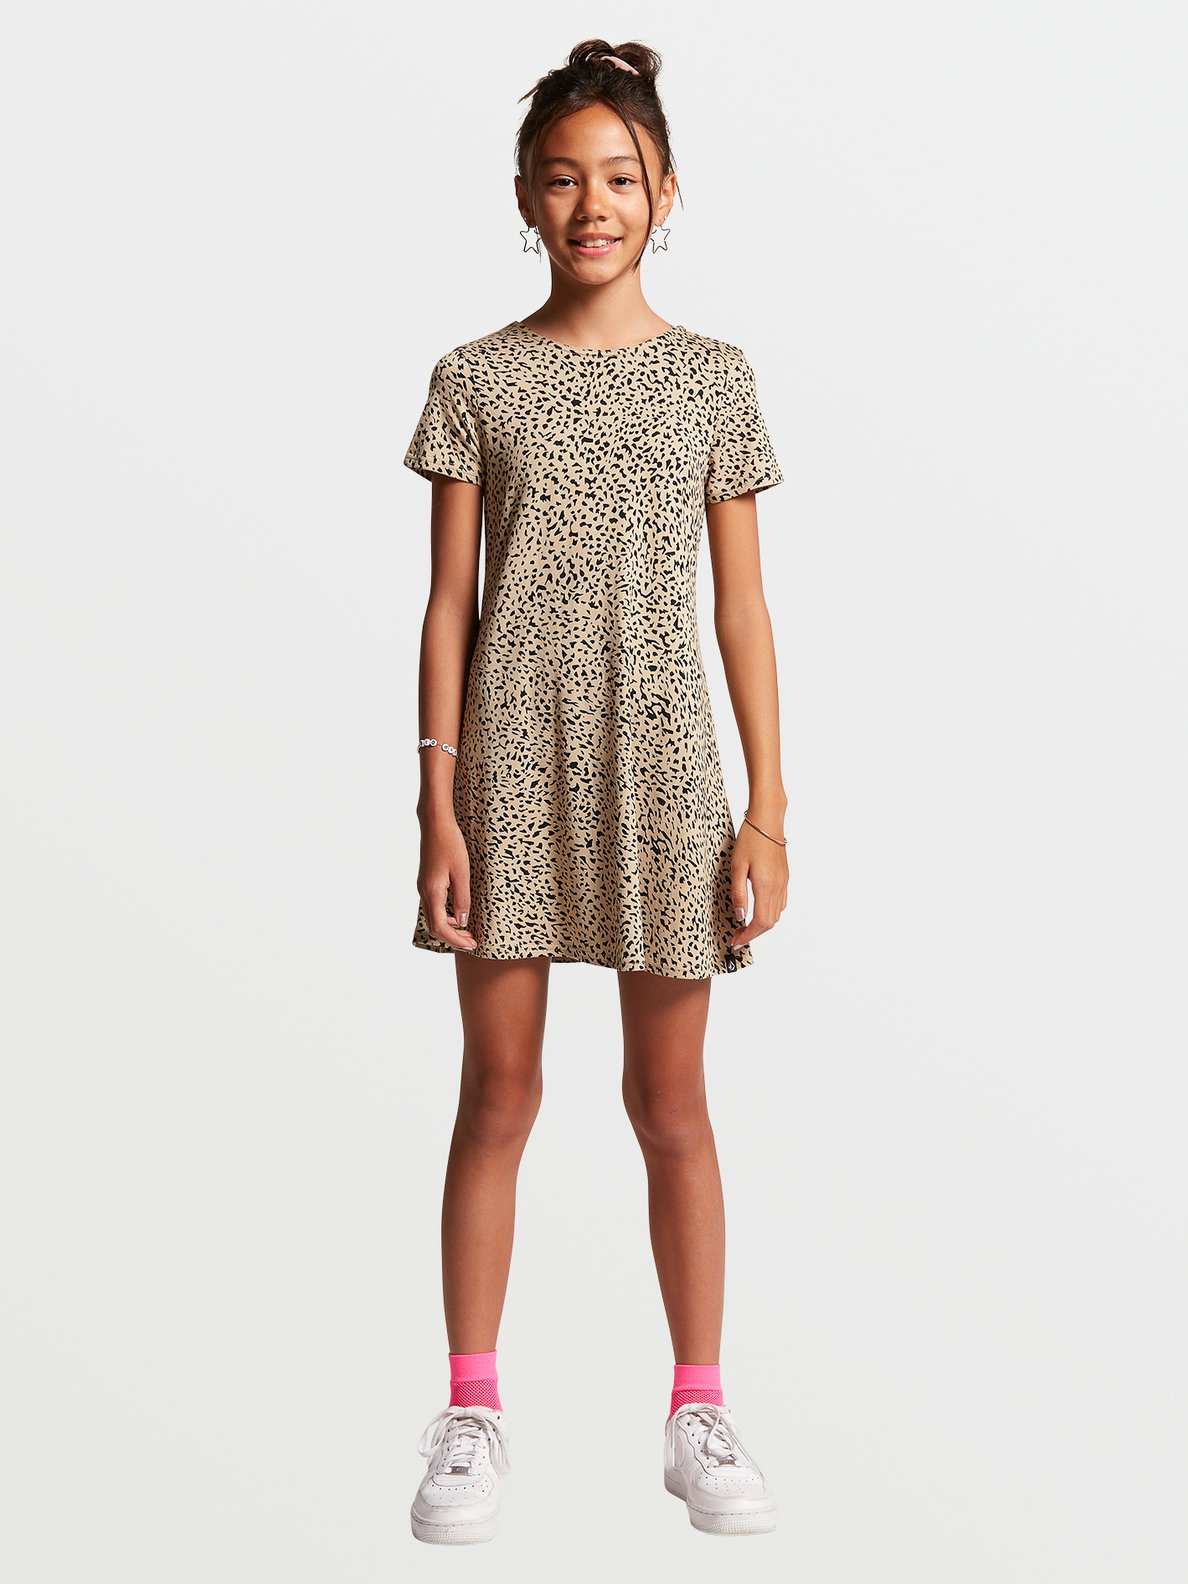 HIGH WIRED DRESS YOUTH